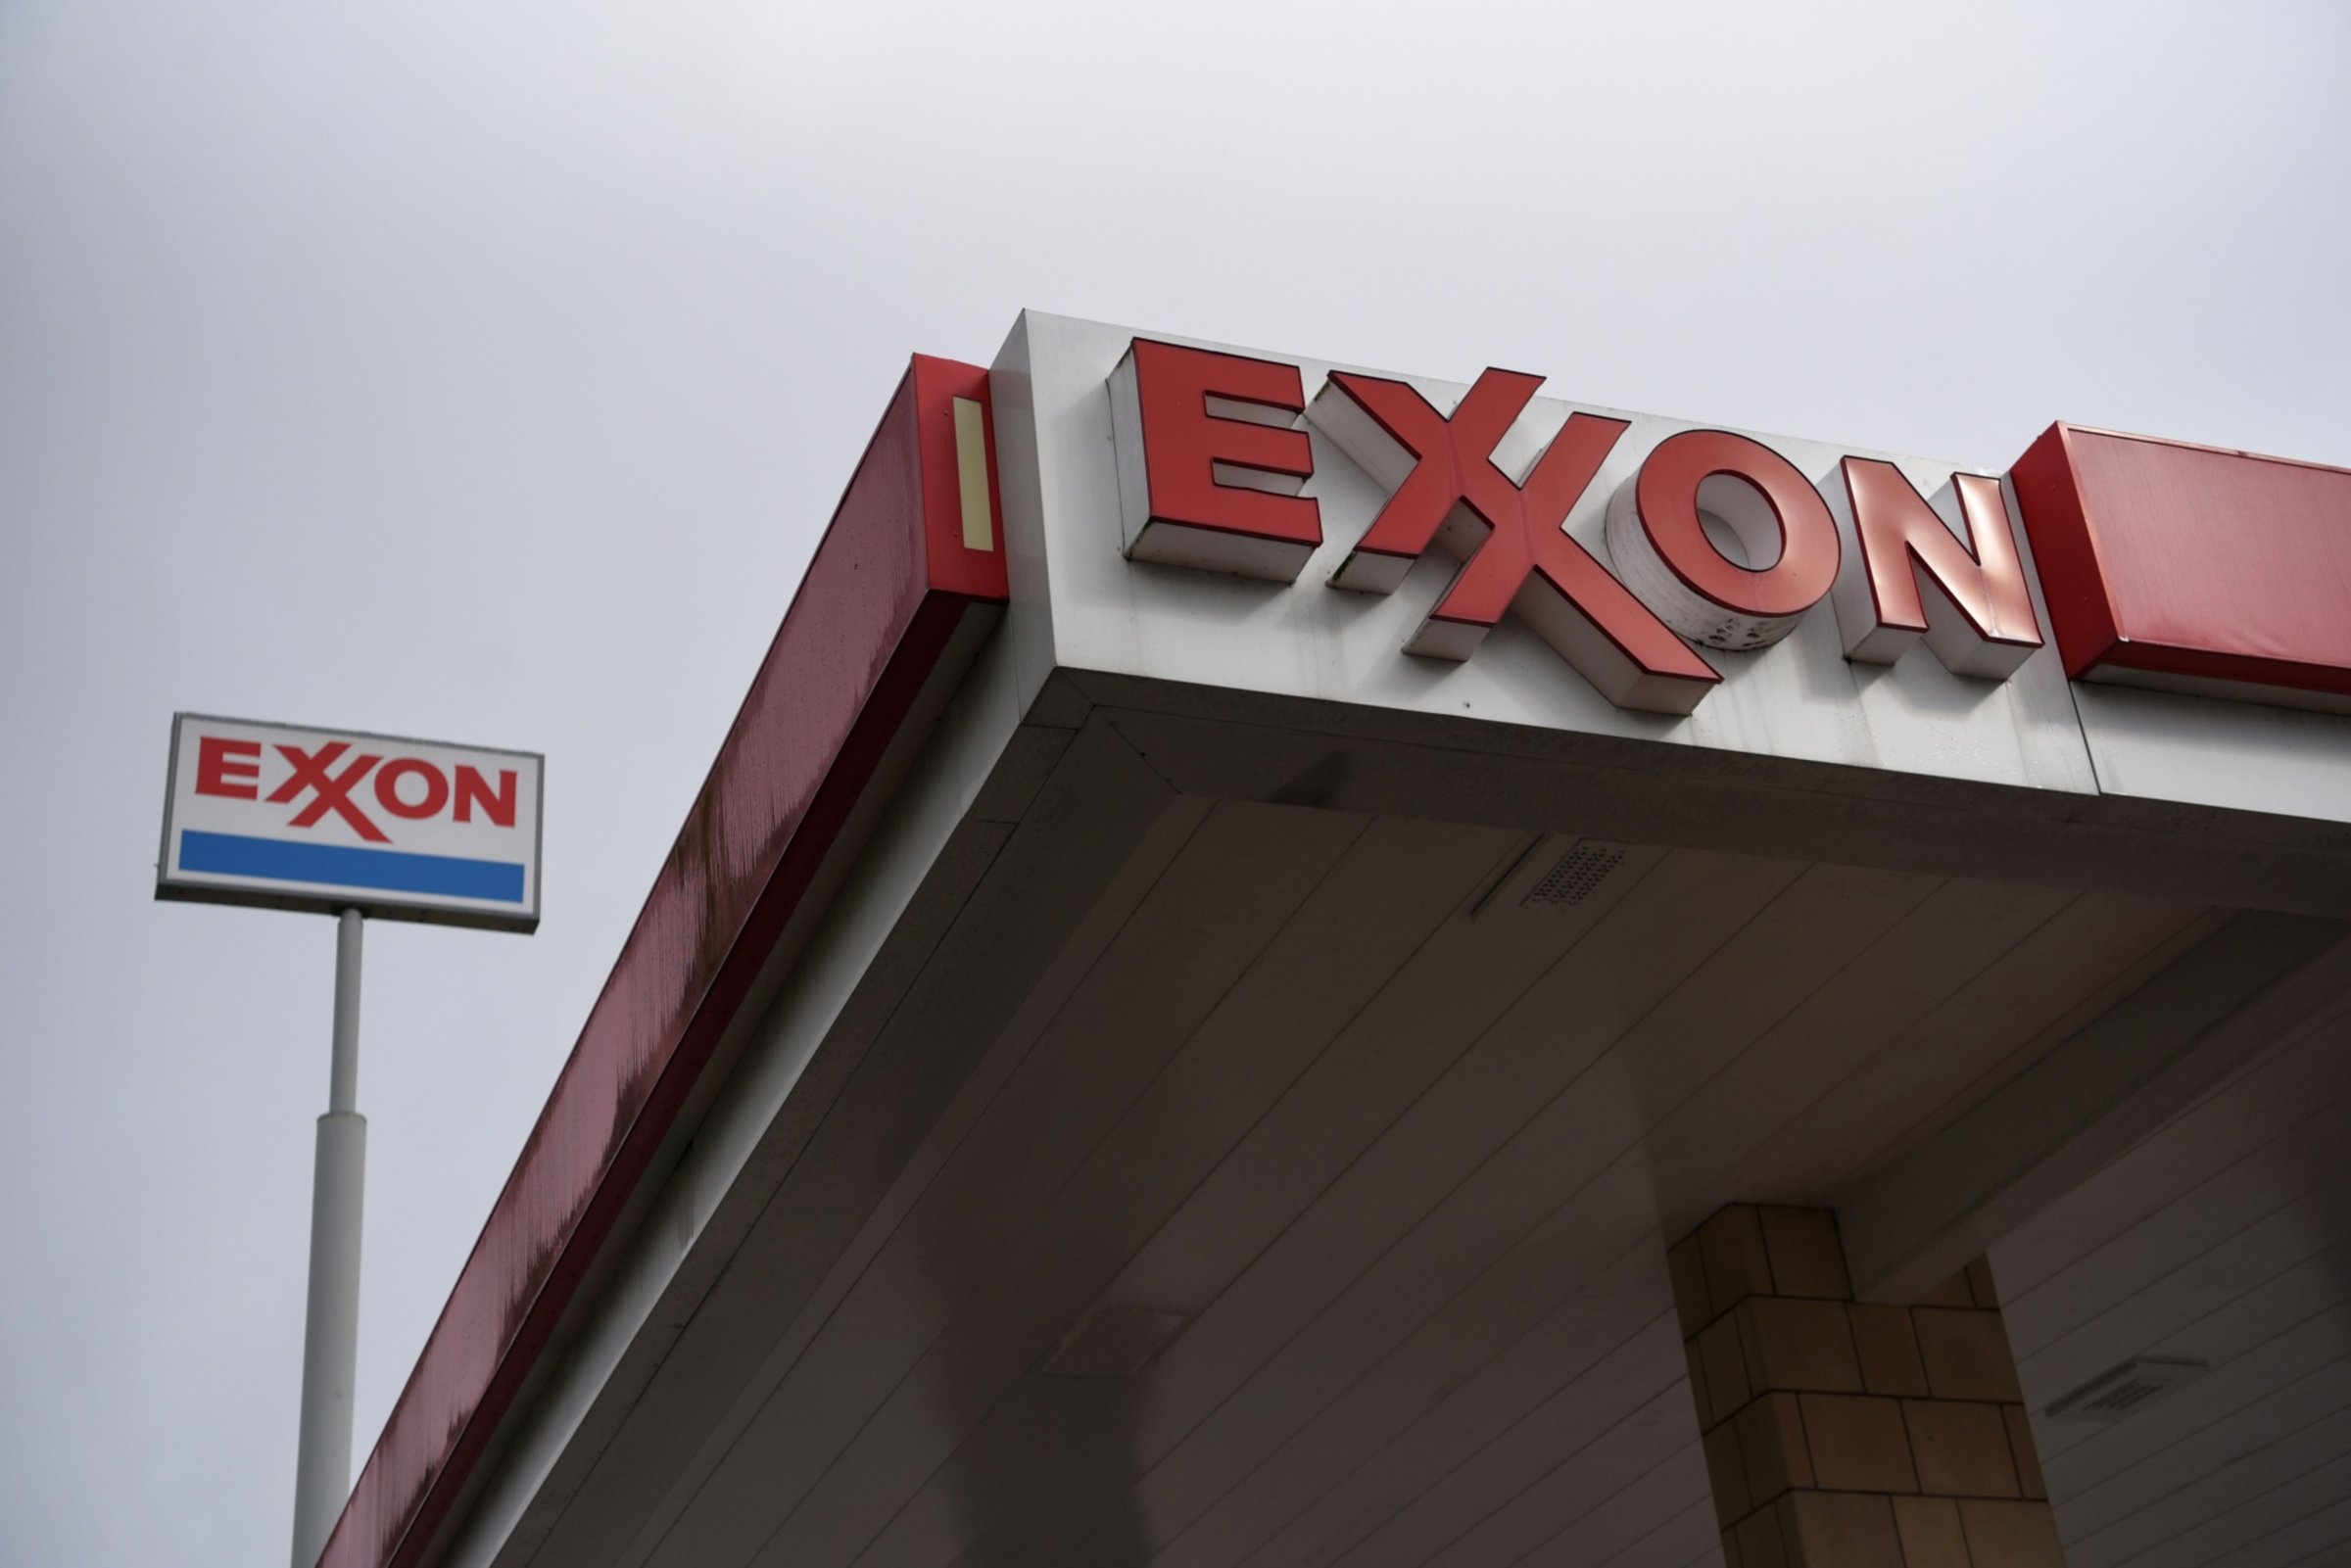 Signage at an Exxon Mobil Corp. gas station in Houston, Texas, U.S., on Wednesday, Oct. 28, 2020. Exxon is scheduled to release earnings figures on October 30.